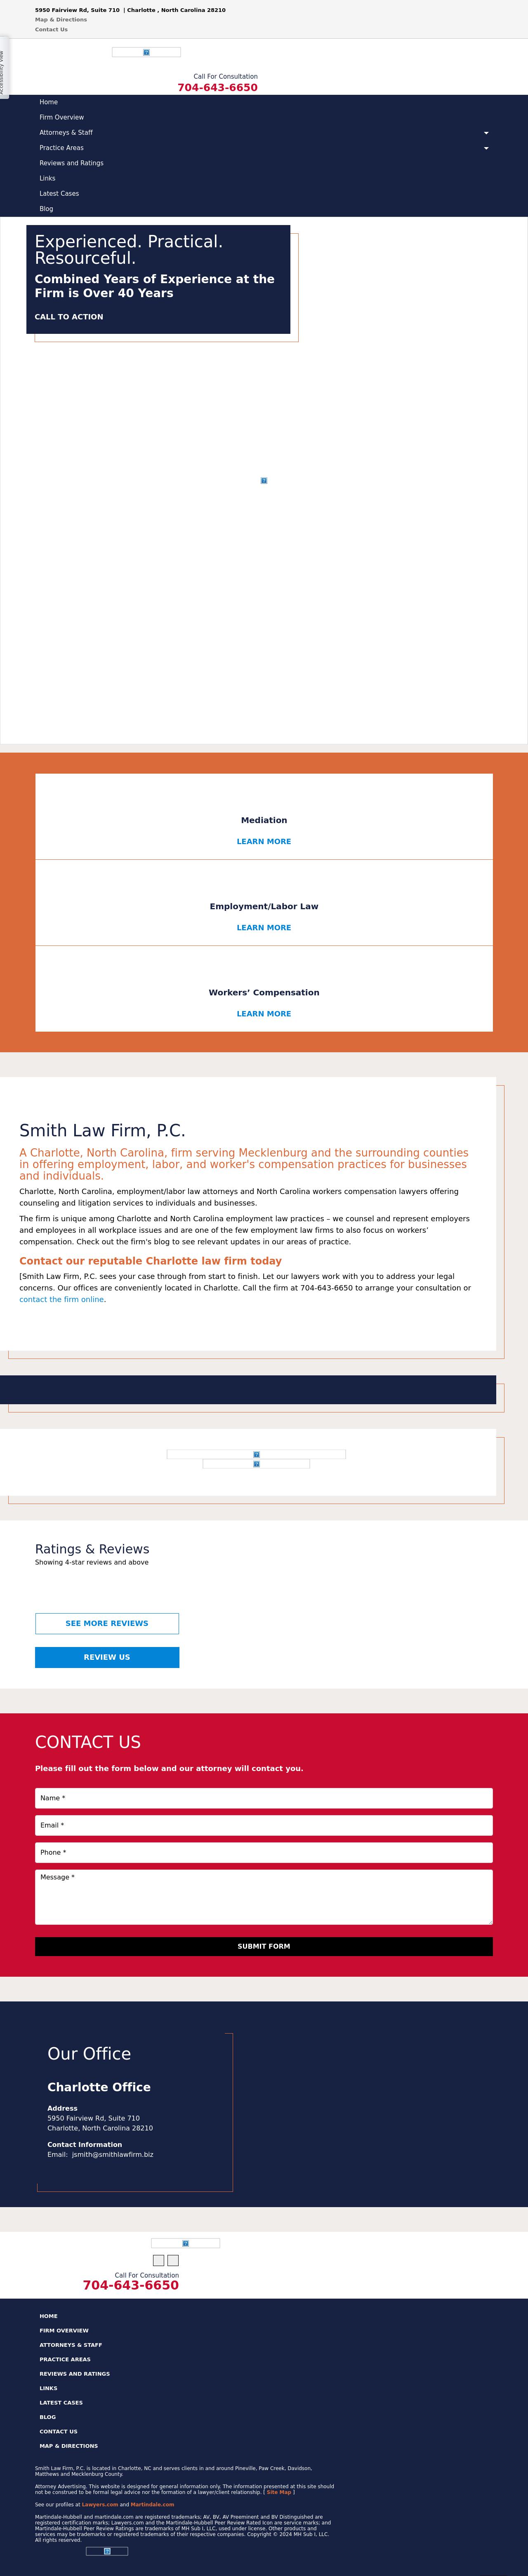 Smith Law Firm, P.C. - Charlotte NC Lawyers